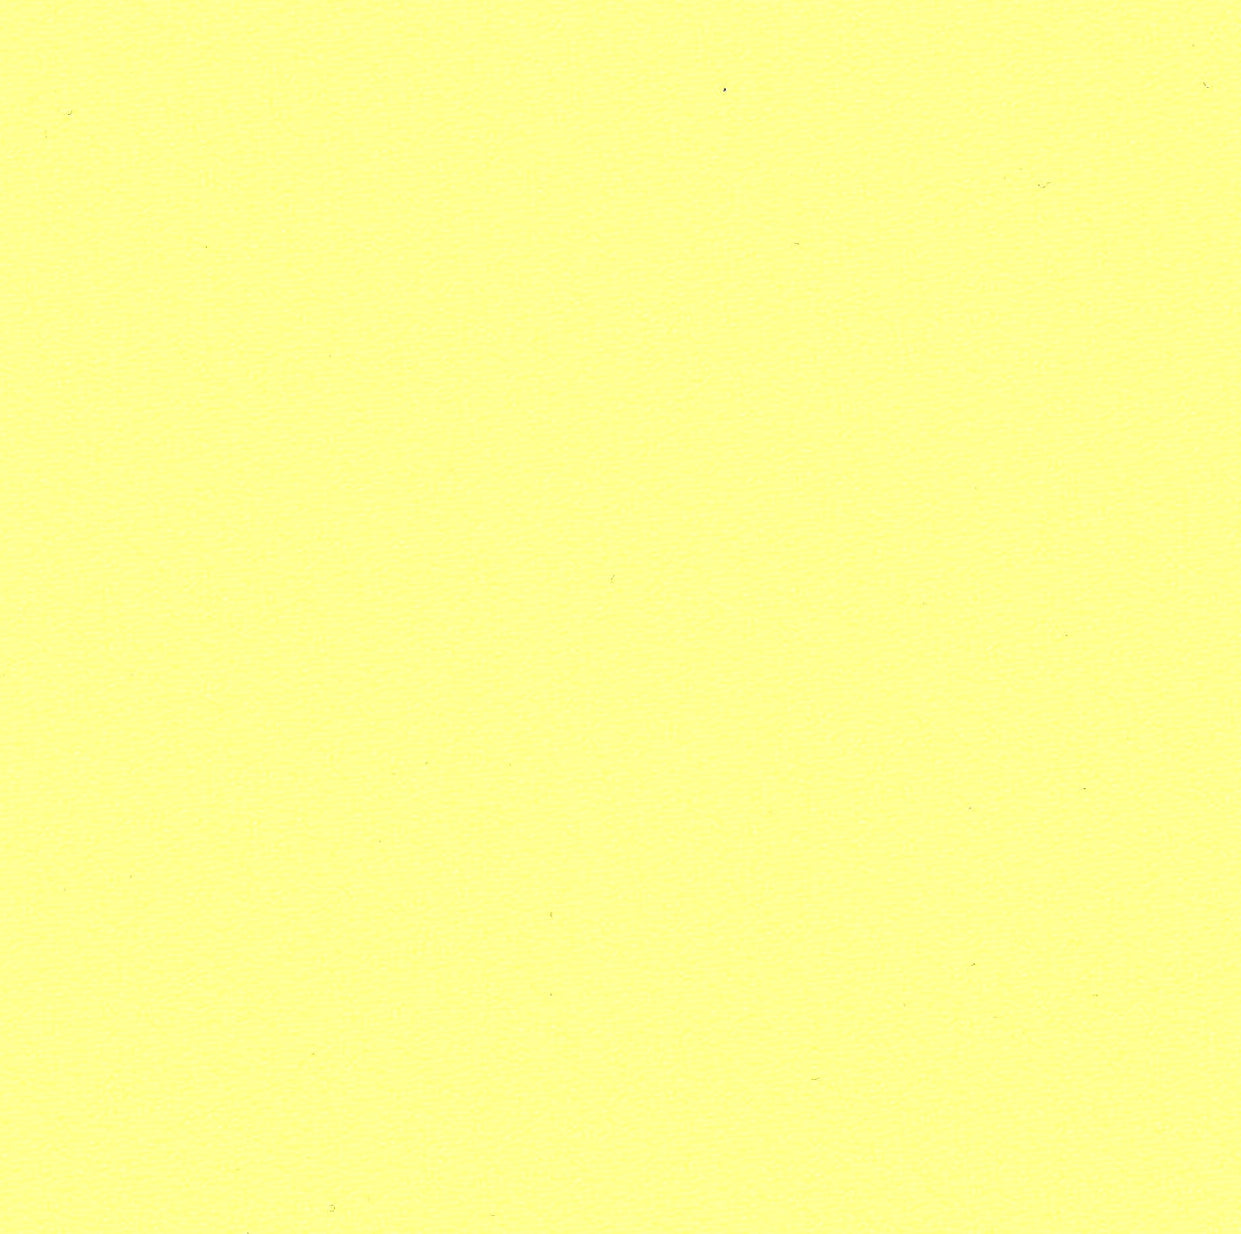 34018-04 Light Yellow Montel Crepe Pain Dyed Blend 223g/yd 45&quot; crepe plain dyed polyester spandex woven yellow Solid Color, Crepe - knit fabric - woven fabric - fabric company - fabric wholesale - fabric b2b - fabric factory - high quality fabric - hong kong fabric - fabric hk - acetate fabric - cotton fabric - linen fabric - metallic fabric - nylon fabric - polyester fabric - spandex fabric - chun wing hing - cwh hk - fabric worldwide ship - 針織布 - 梳織布 - 布料公司- 布料批發 - 香港布料 - 秦榮興